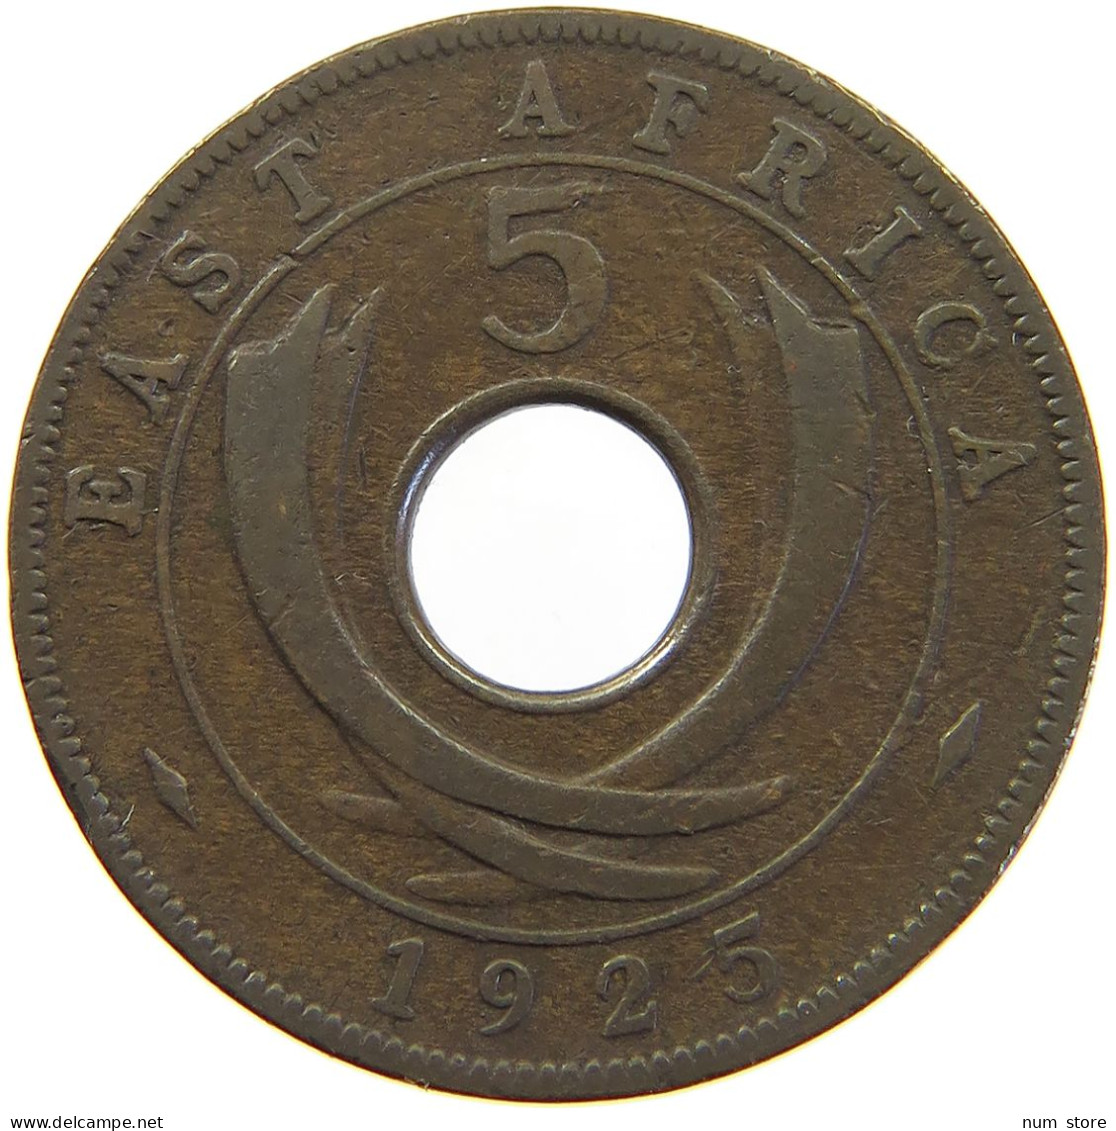 EAST AFRICA 5 CENTS 1925 GEORGE V. (1910-1936) #MA 065522 - Colonia Británica